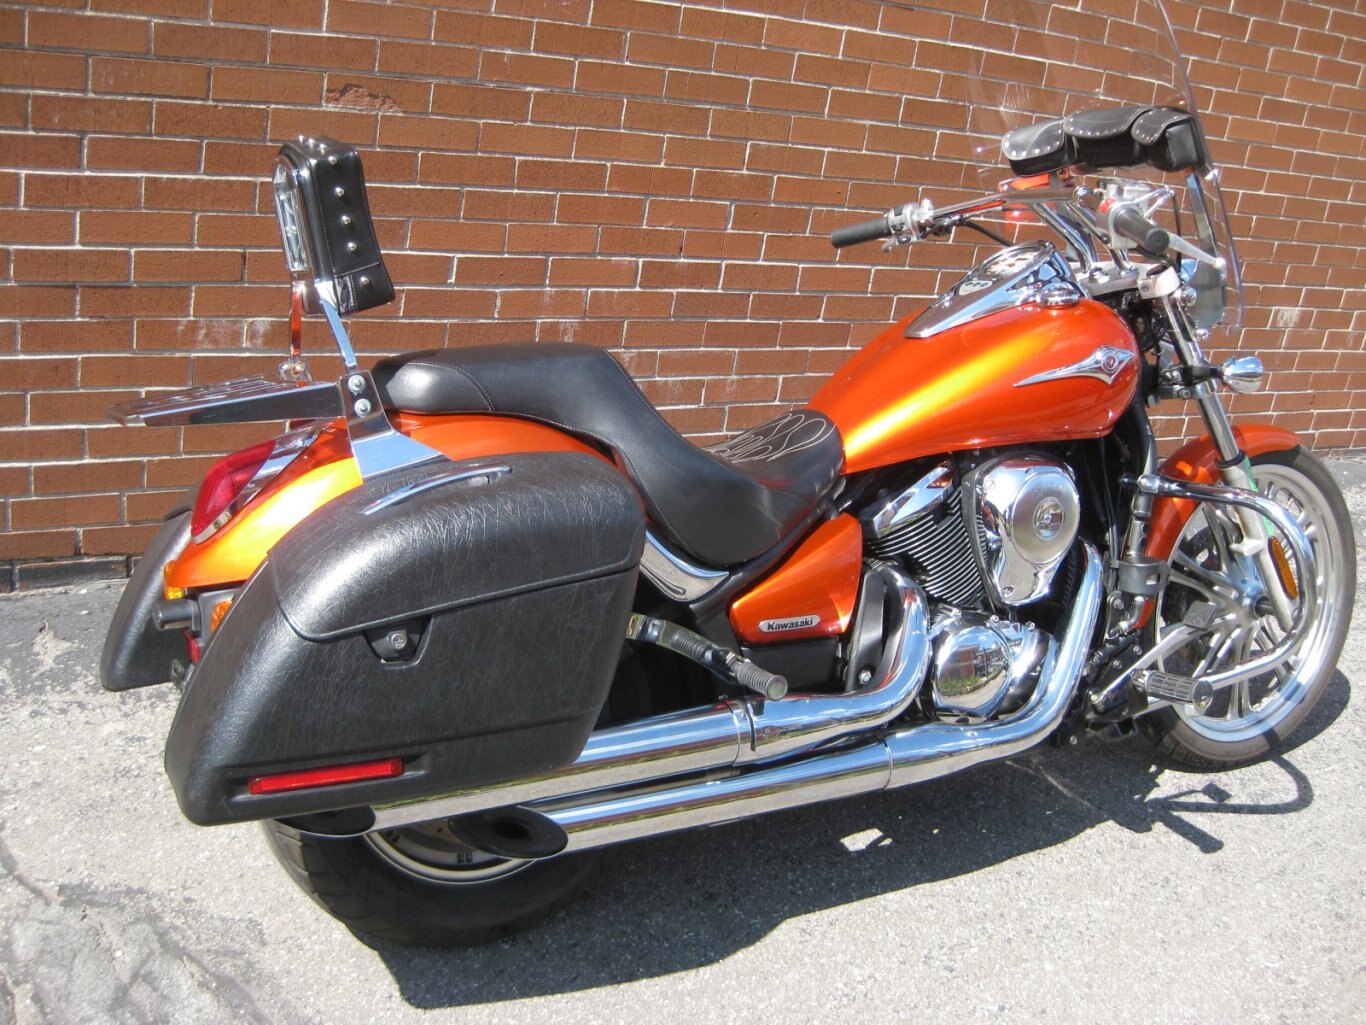 2009 Kawasaki Vulcan 900 Custom SOLD CONGRATULATIONS MARK, WELCOME TO THE WORLD OF TWO WHEELED EXCITEMENT!!